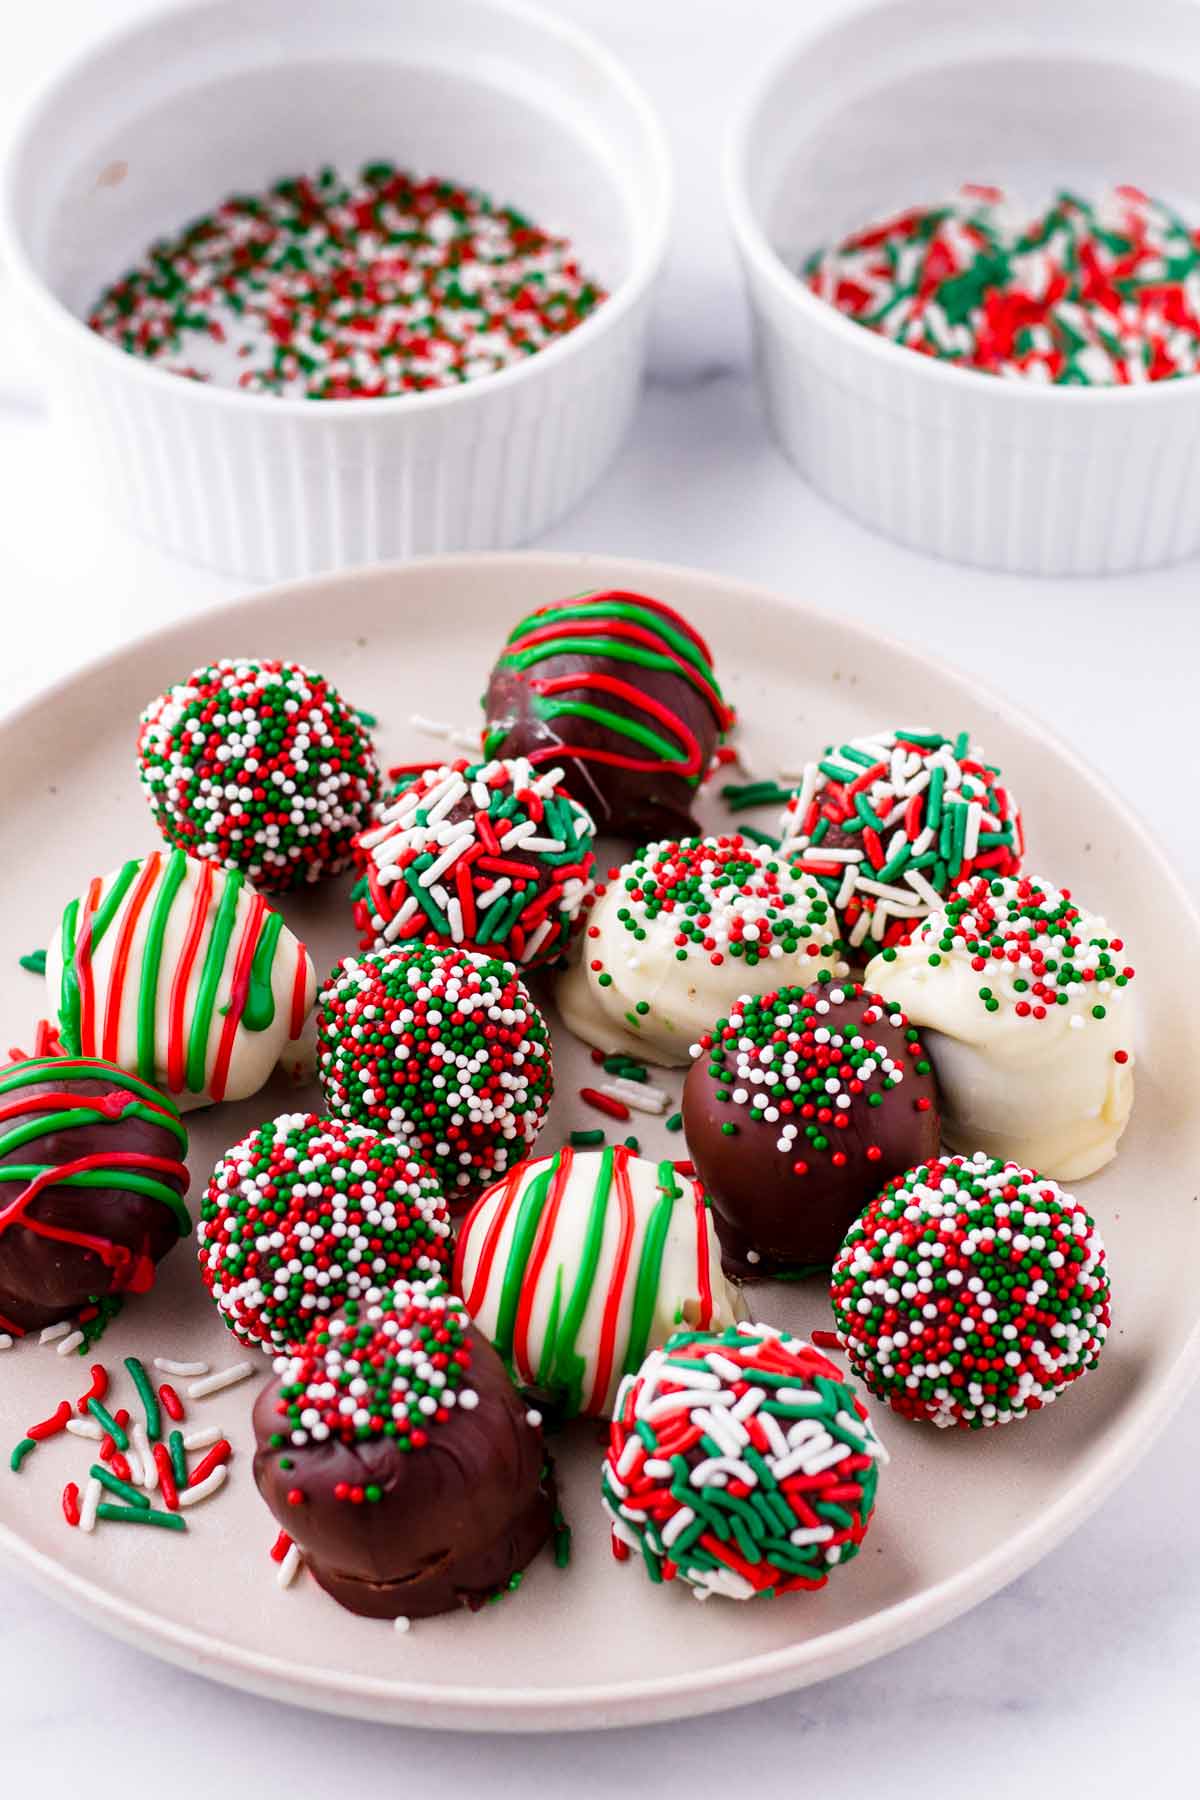 Christmas chocolate truffles with lots of festive sprinkles